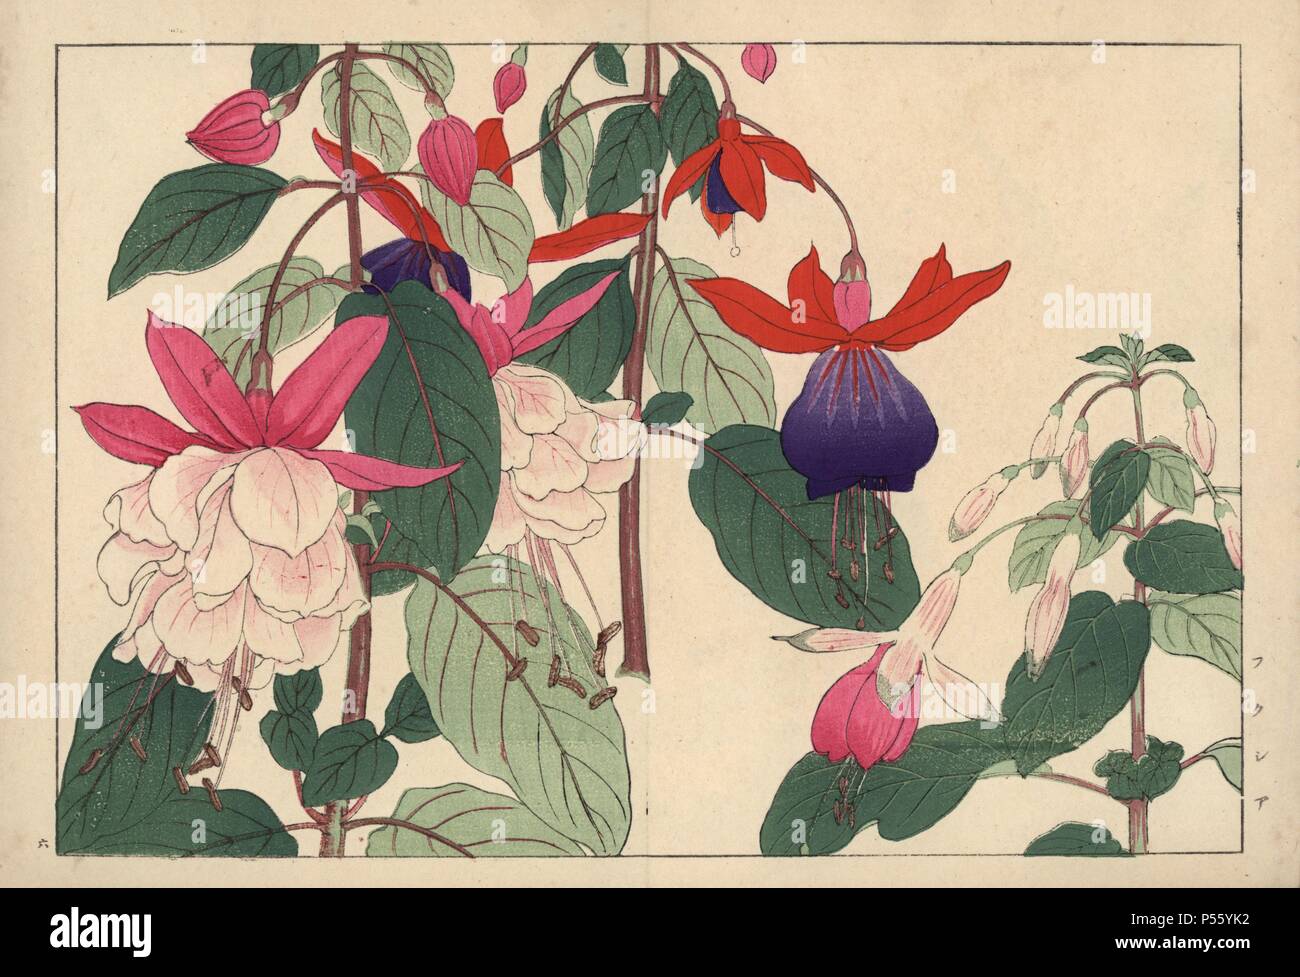 Fuchsia varieties. Handcoloured woodblock print from Konan Tanigami's 'Seiyou Sokazufu' (Pictorial Album of Western Plants and Flowers: Summer), Unsodo, Kyoto, 1917. Tanigami (1879-1928) depicted 125 varieties of garden plants through the four seasons. Stock Photo